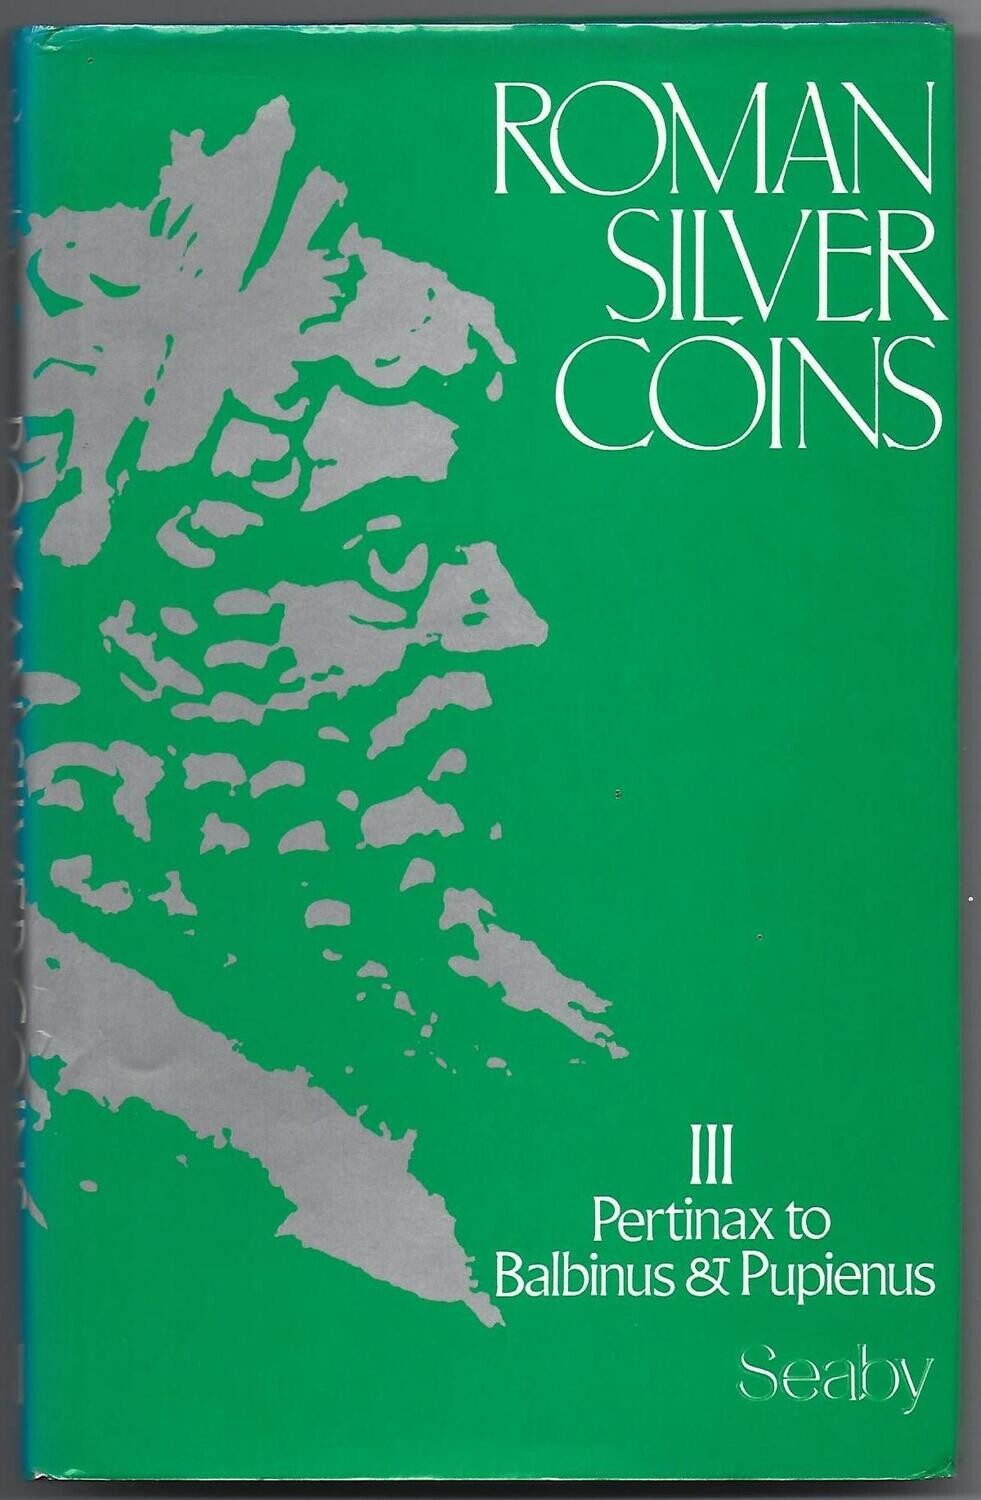 Ancients; H.A. Seaby, "Roman Silver Coins, Volume III."